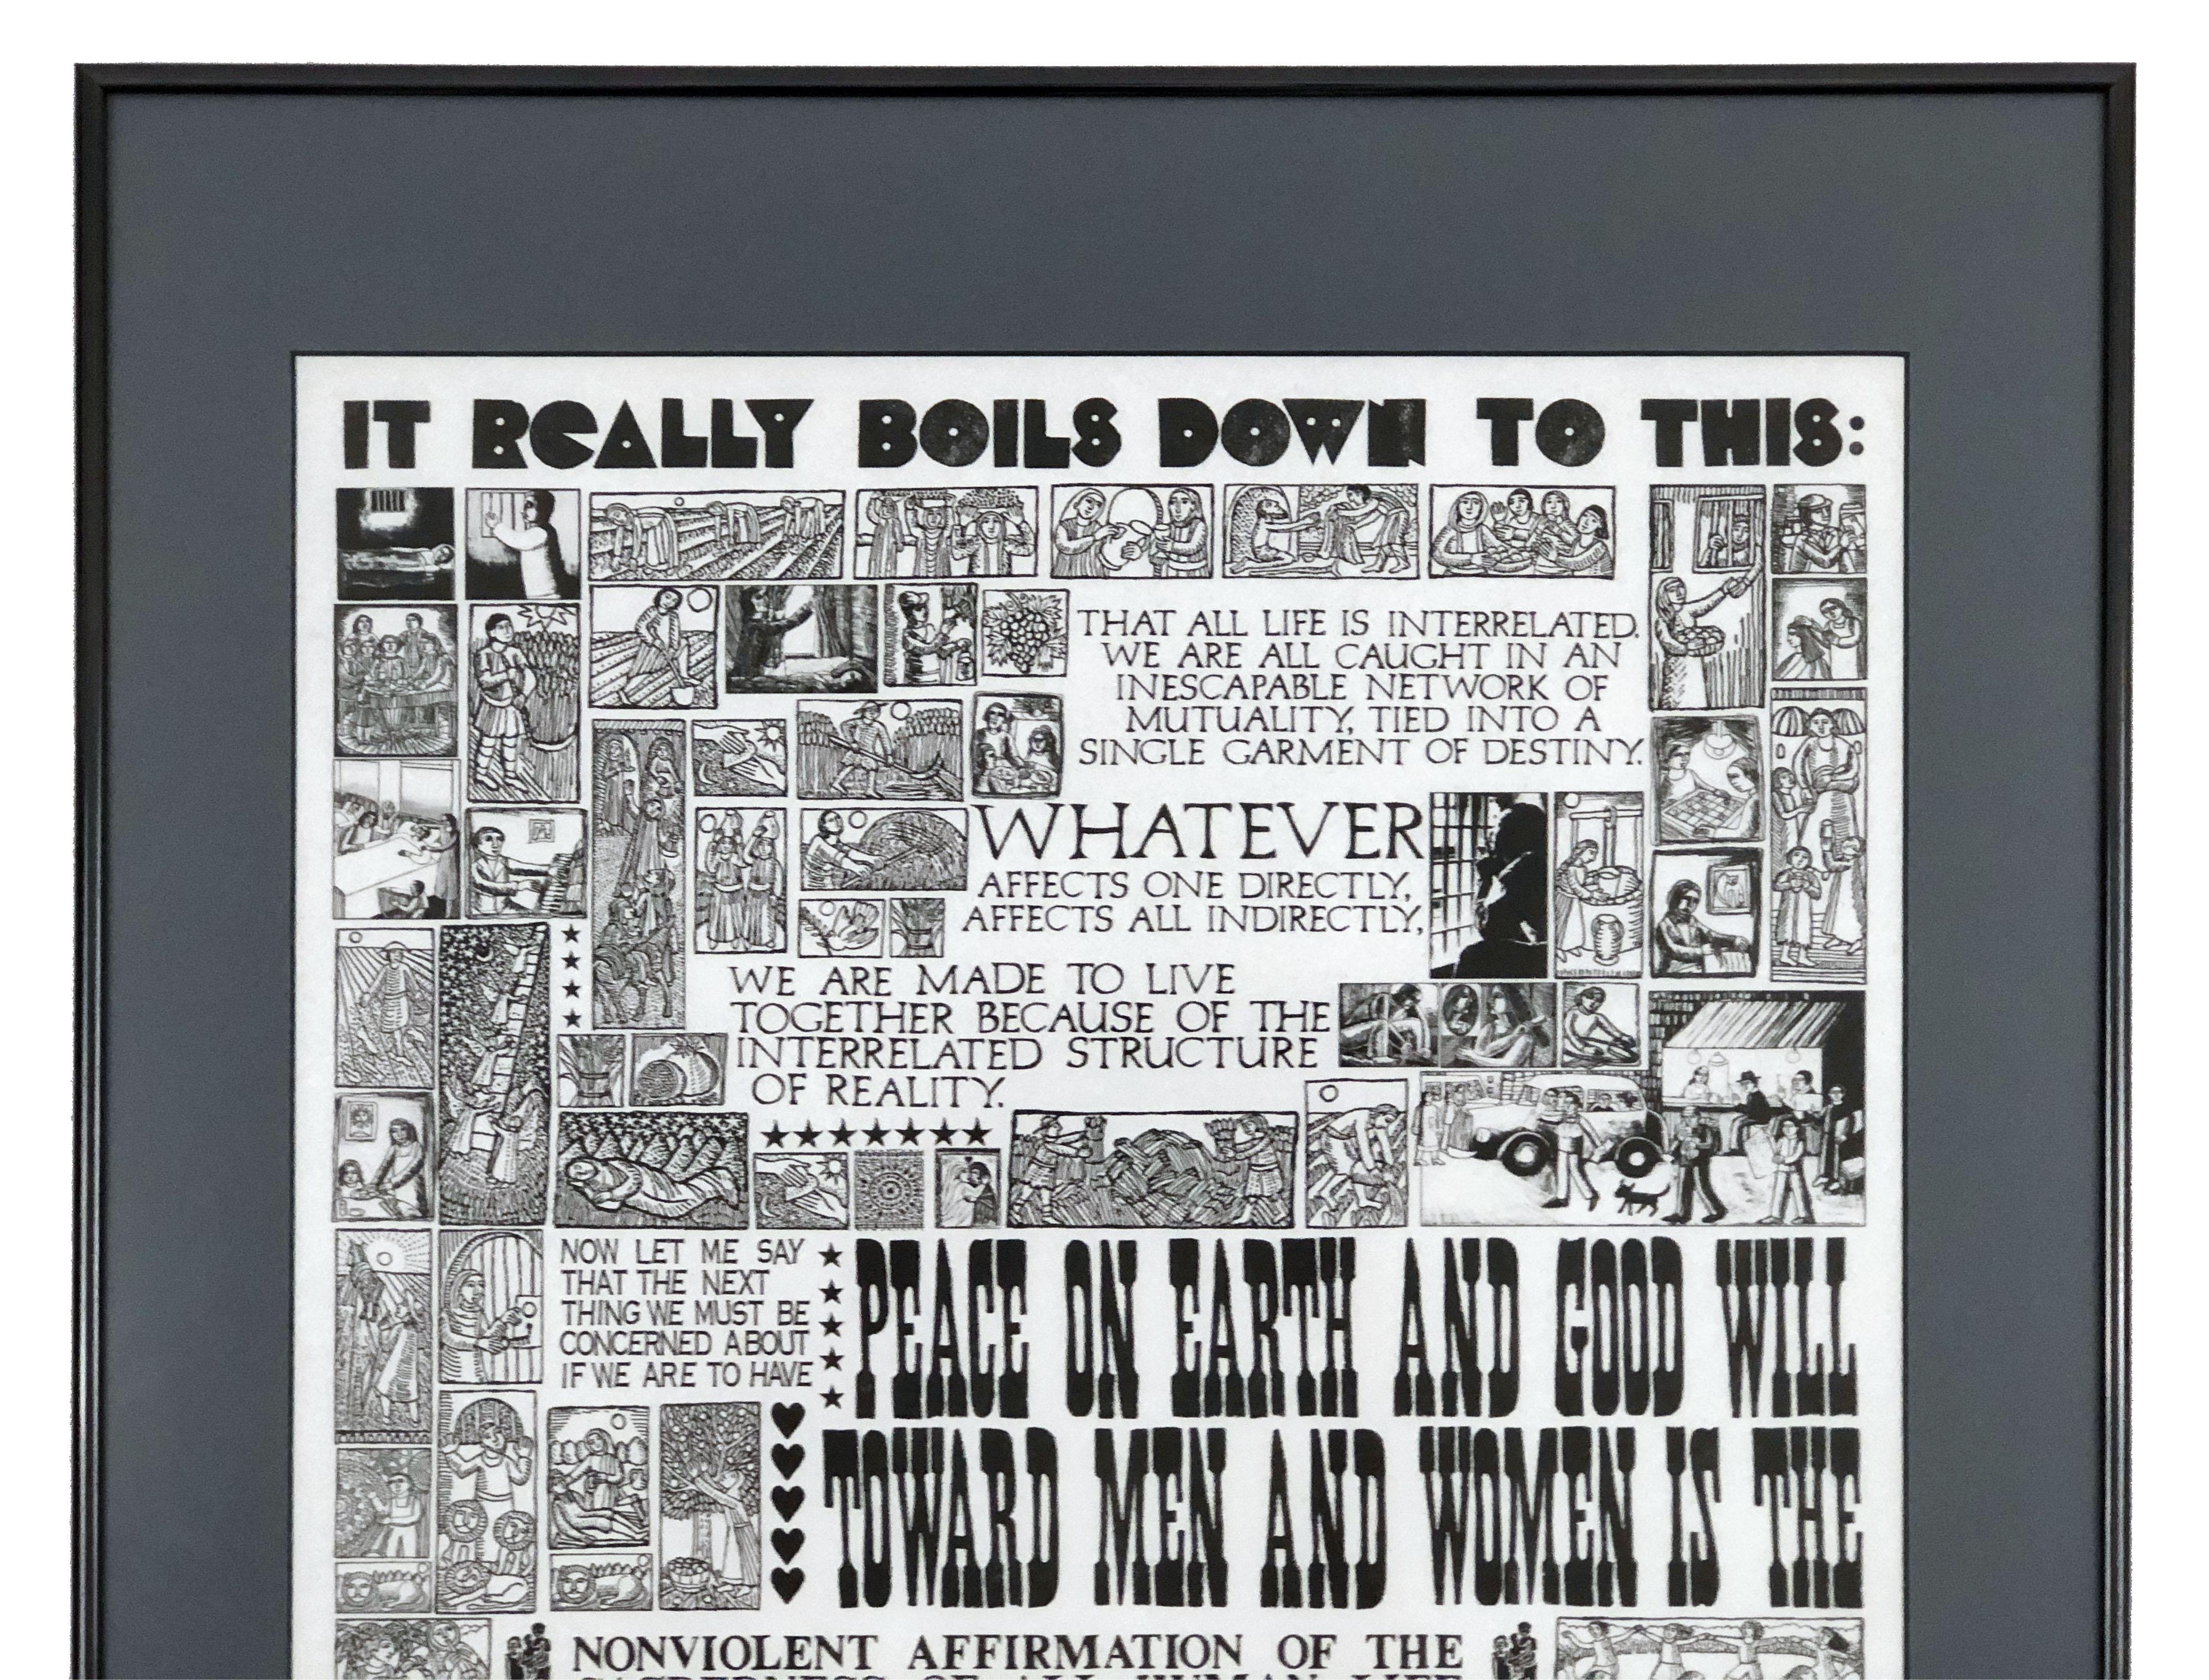 This lithographic print is a 2013 revival of the artist’s 1968 ‘Exploding Newspaper’ series. Signed. Framed under non-reflective glass.

The fonts were created with carved erasers.

Image dimensions: 20 in. W x 31 in. H. 
Frame dimensions: 24